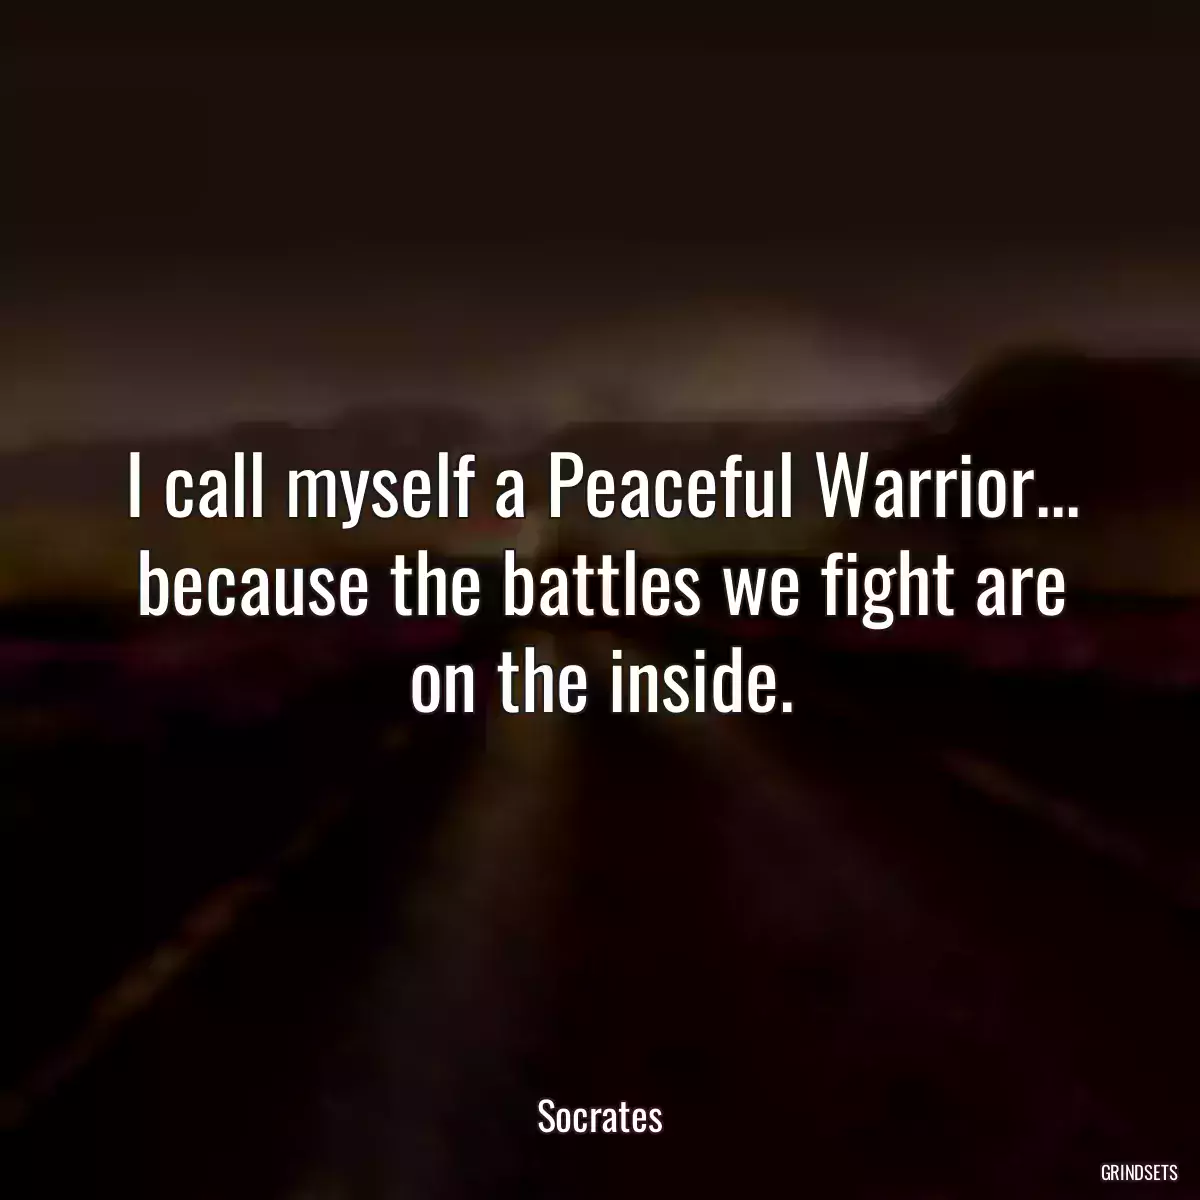 I call myself a Peaceful Warrior... because the battles we fight are on the inside.